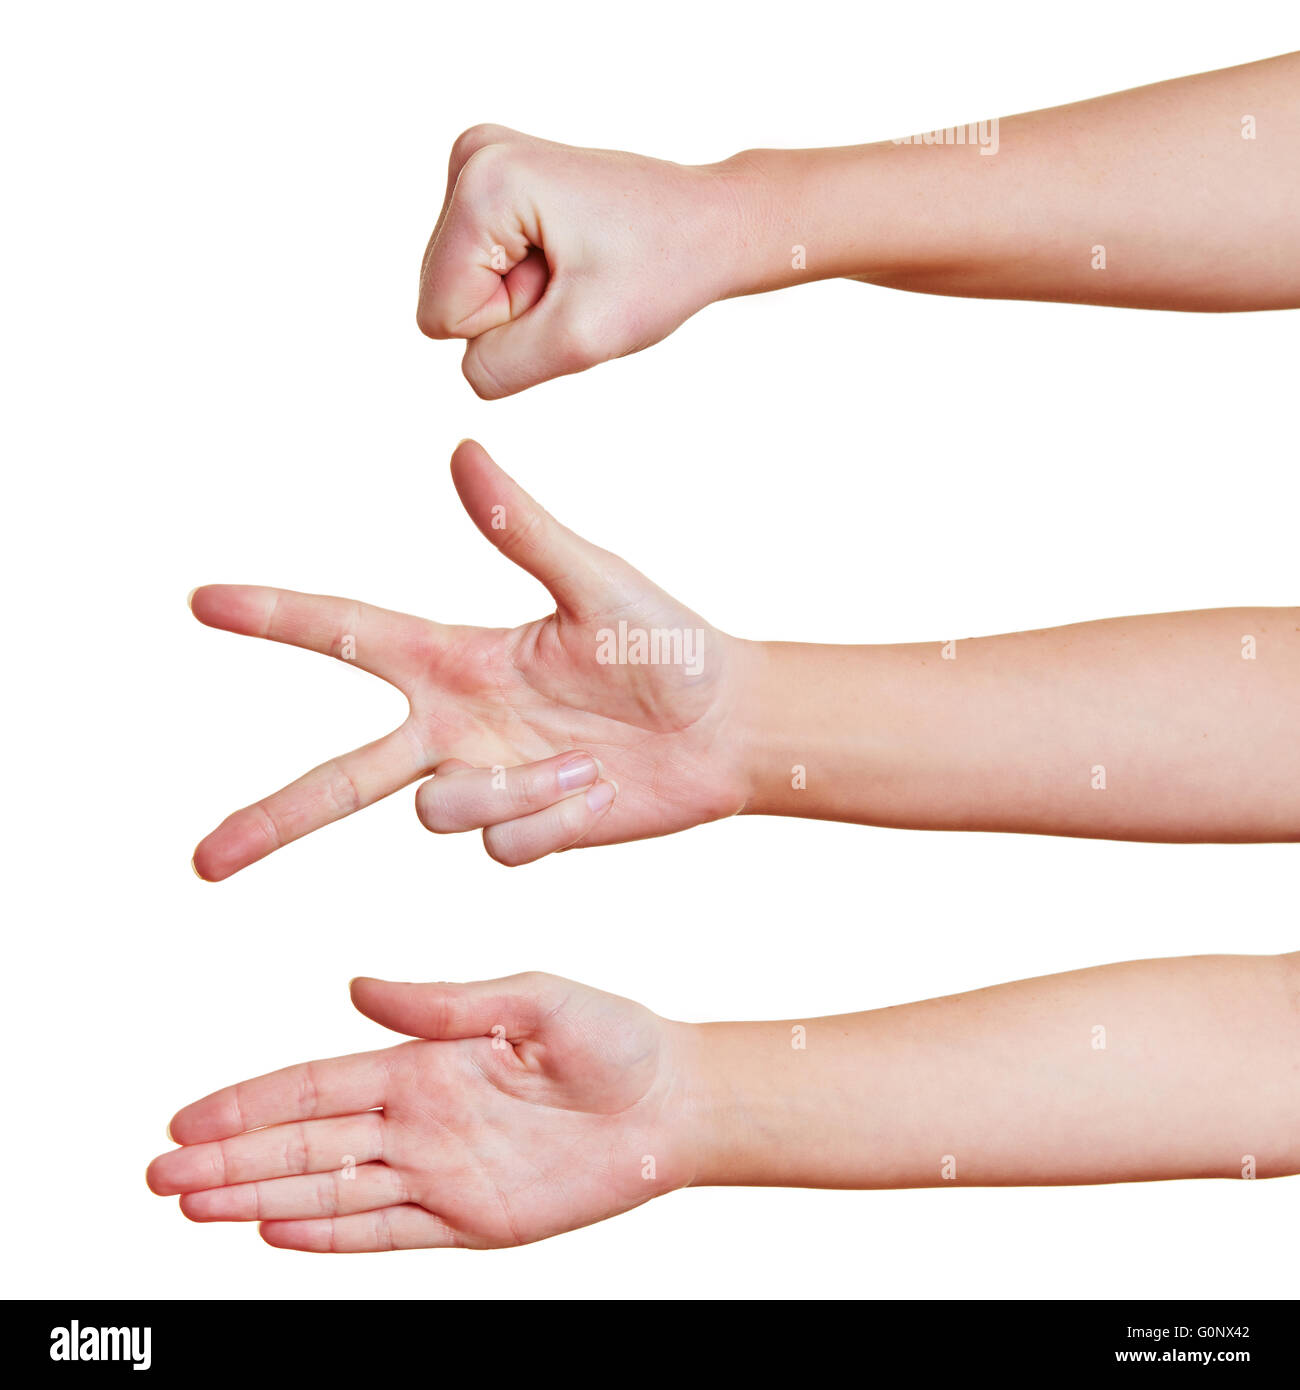 Hands showing the symbols rock paper scissors for a hand game Stock Photo